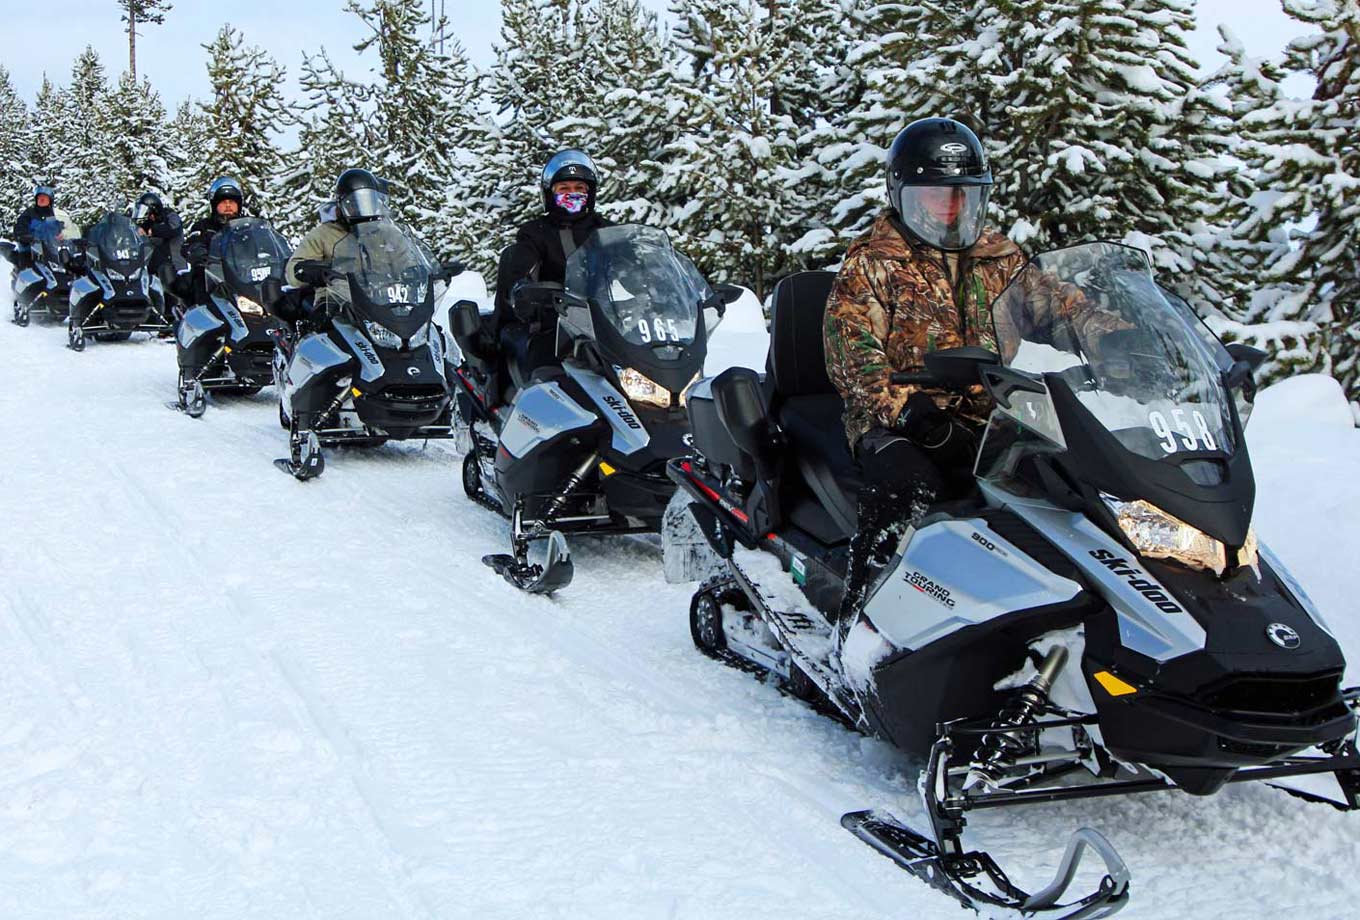 A group of snowmobile riders on a guided tour through Yellowstone National Park